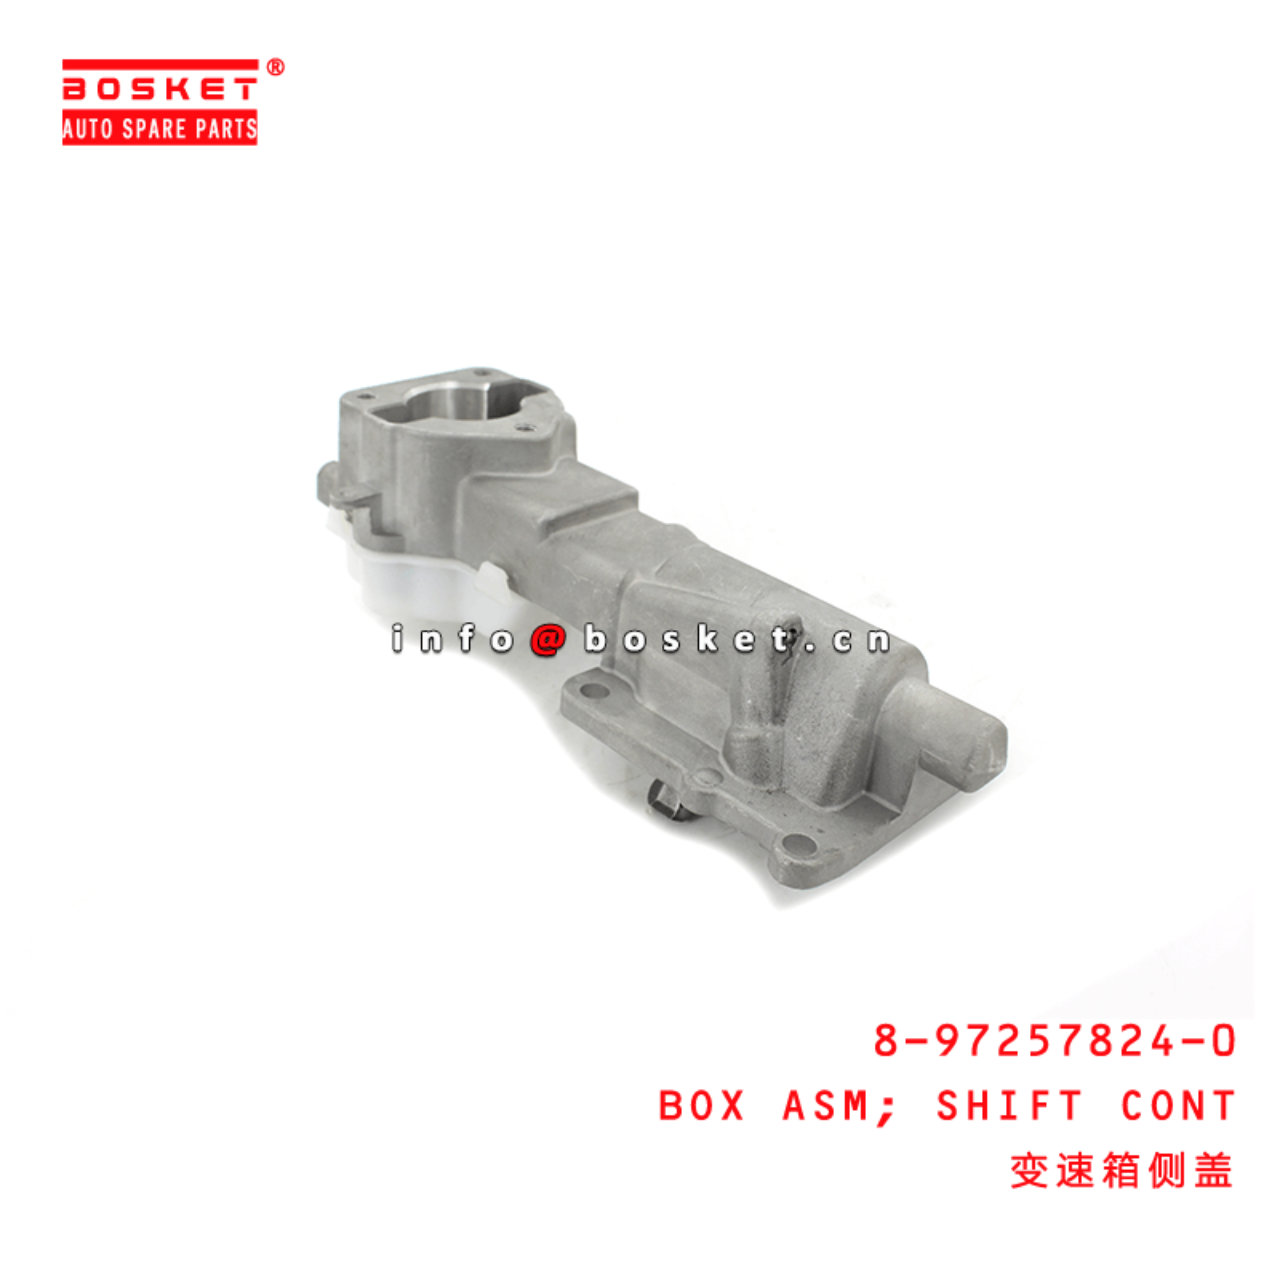 8-97257824-0 Shift Control Box Assembly Suitable for ISUZU D-MAX 8972578240